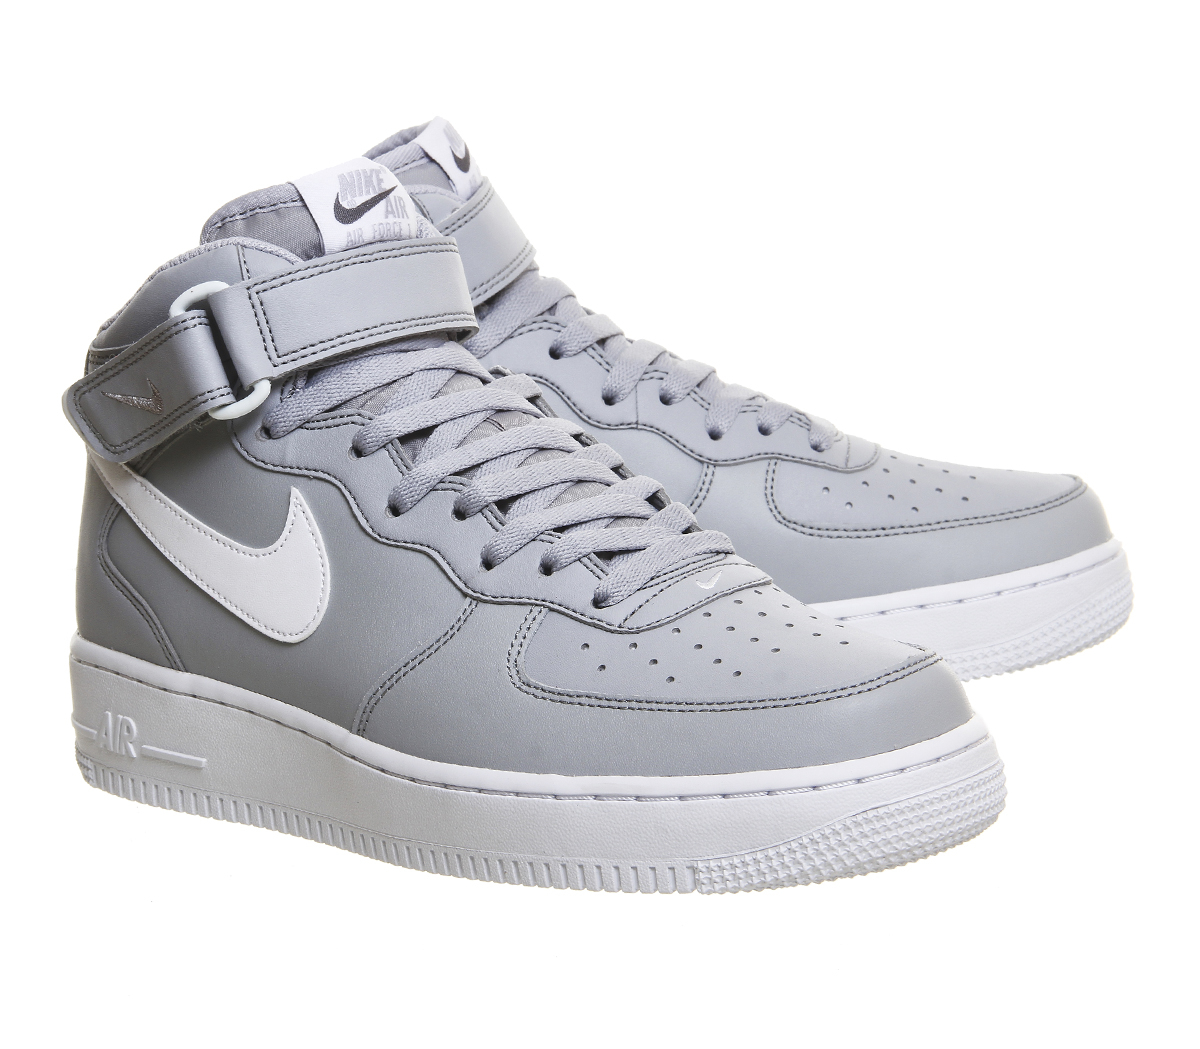 Nike Leather Air Force 1 Mid in Grey (Gray) - Lyst